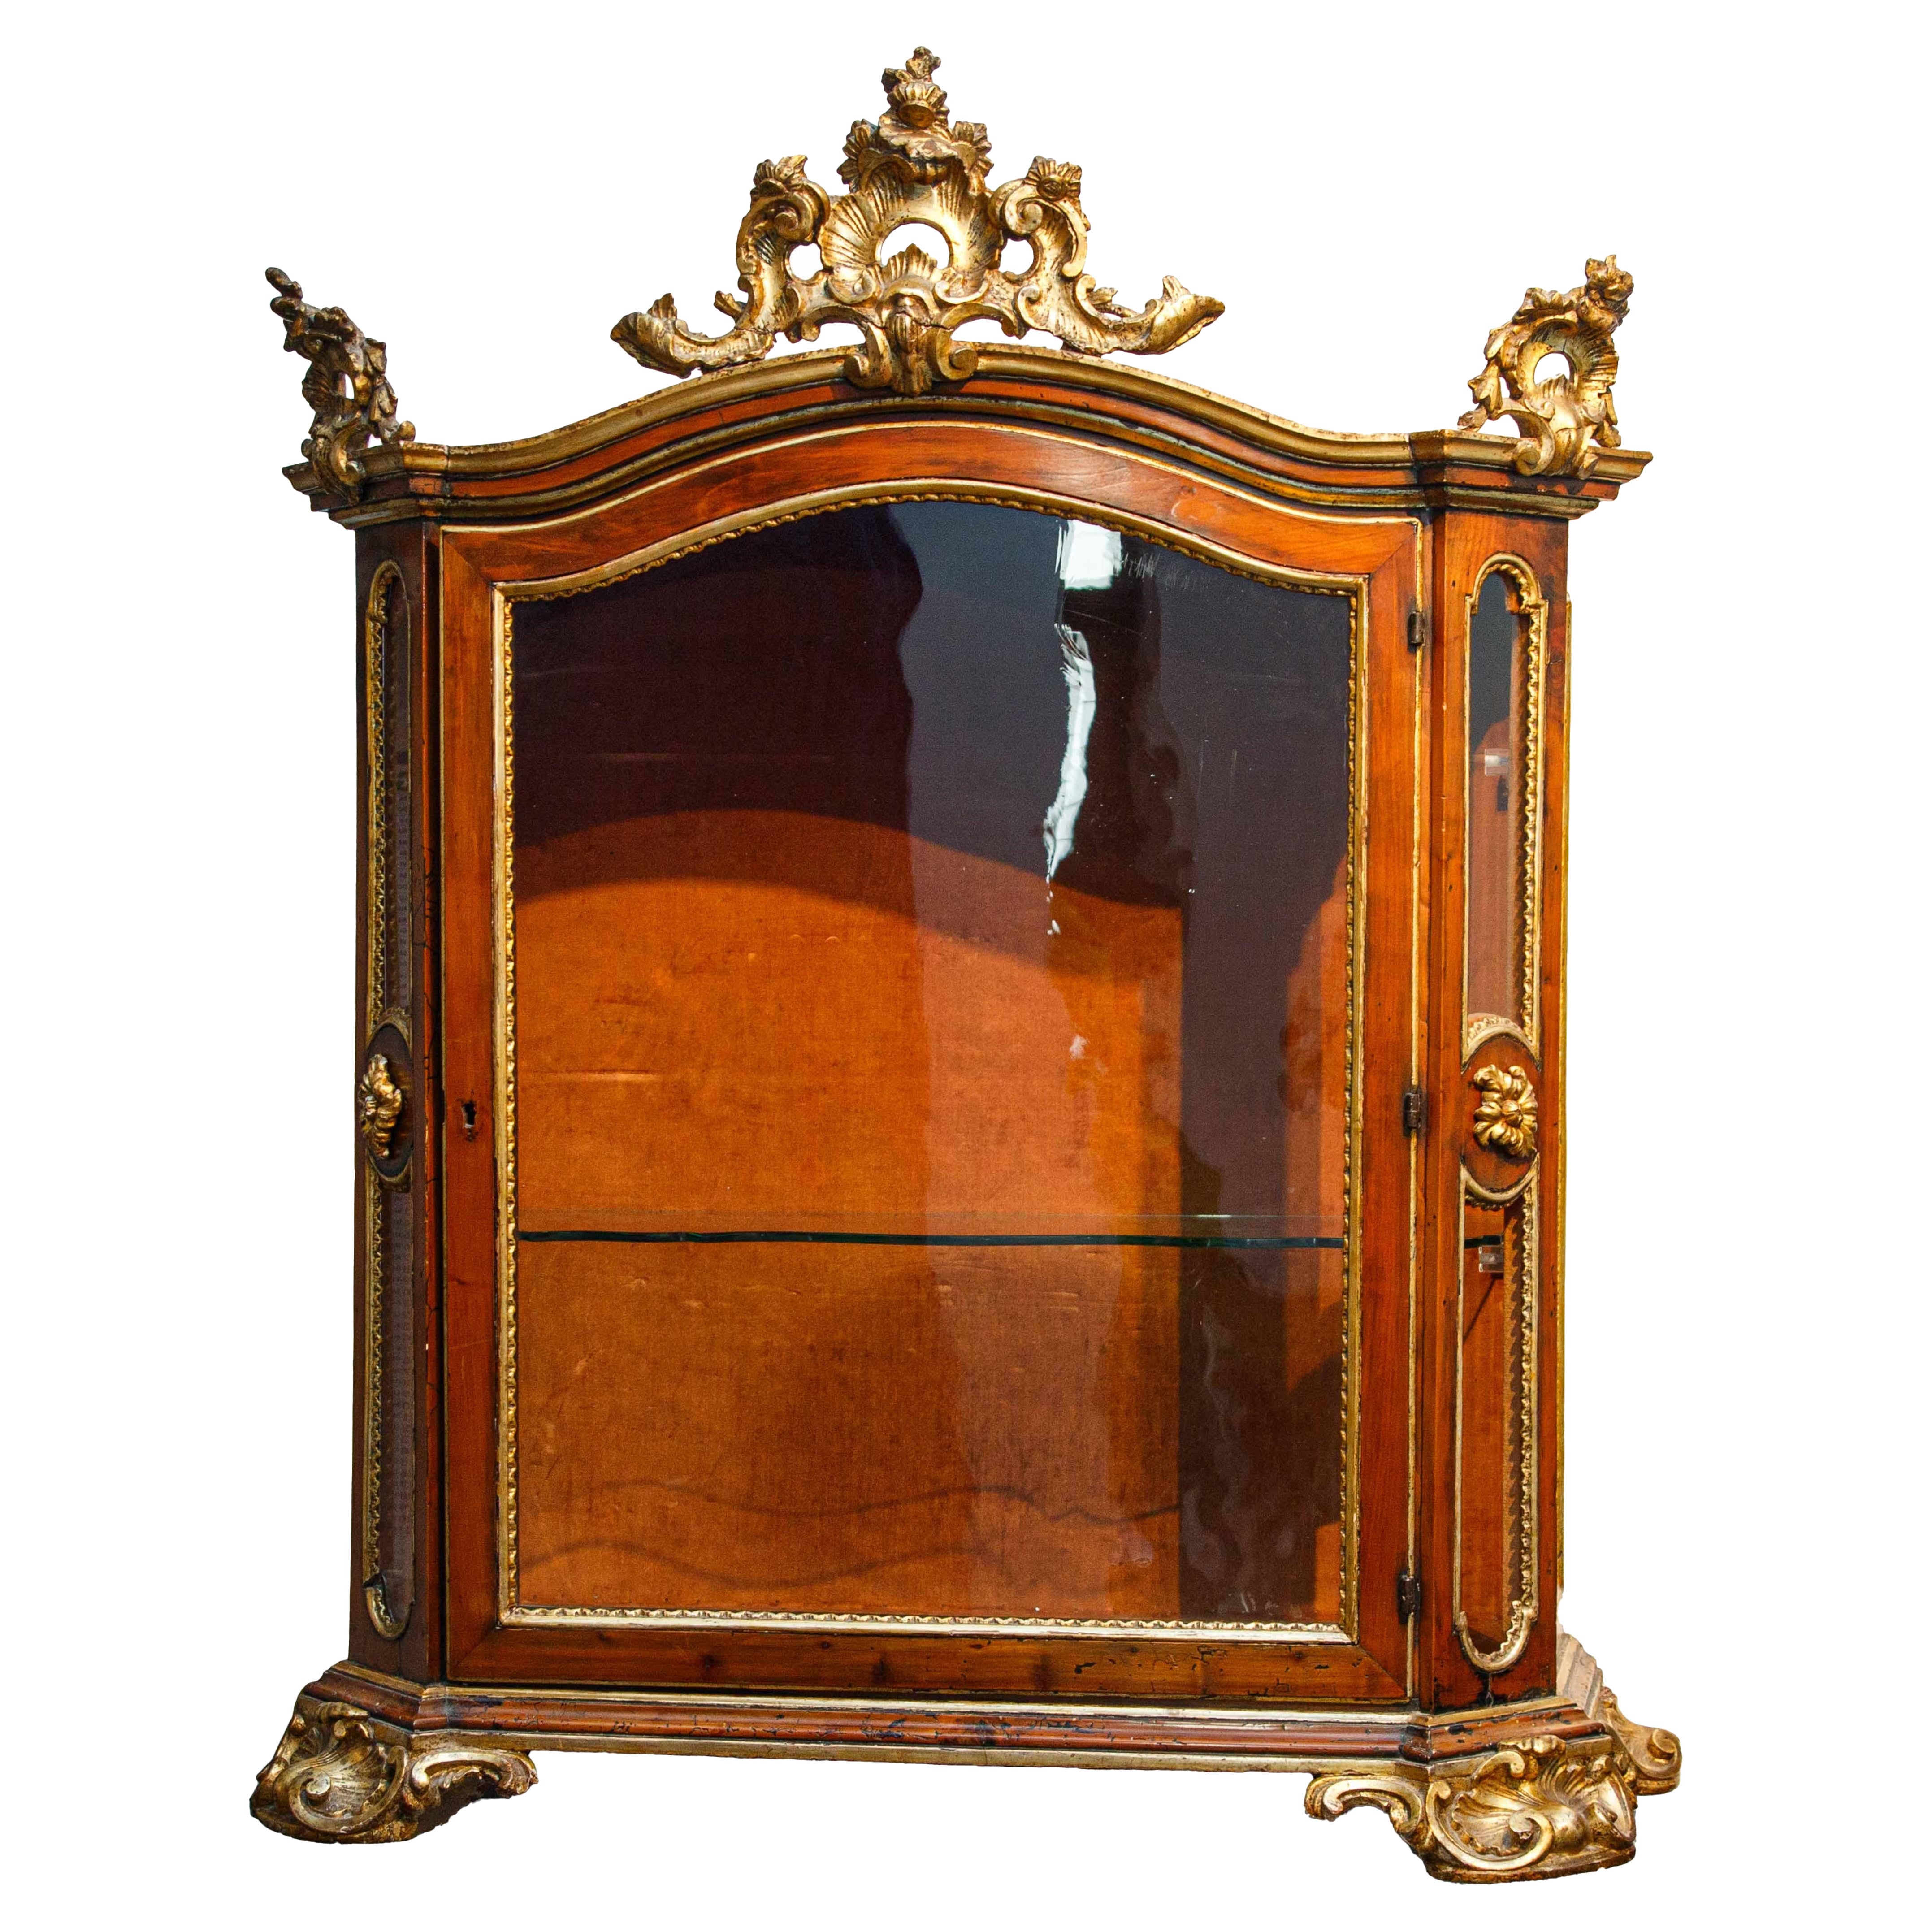 Wooden showcase with gilt profiling, Rome, 18th century